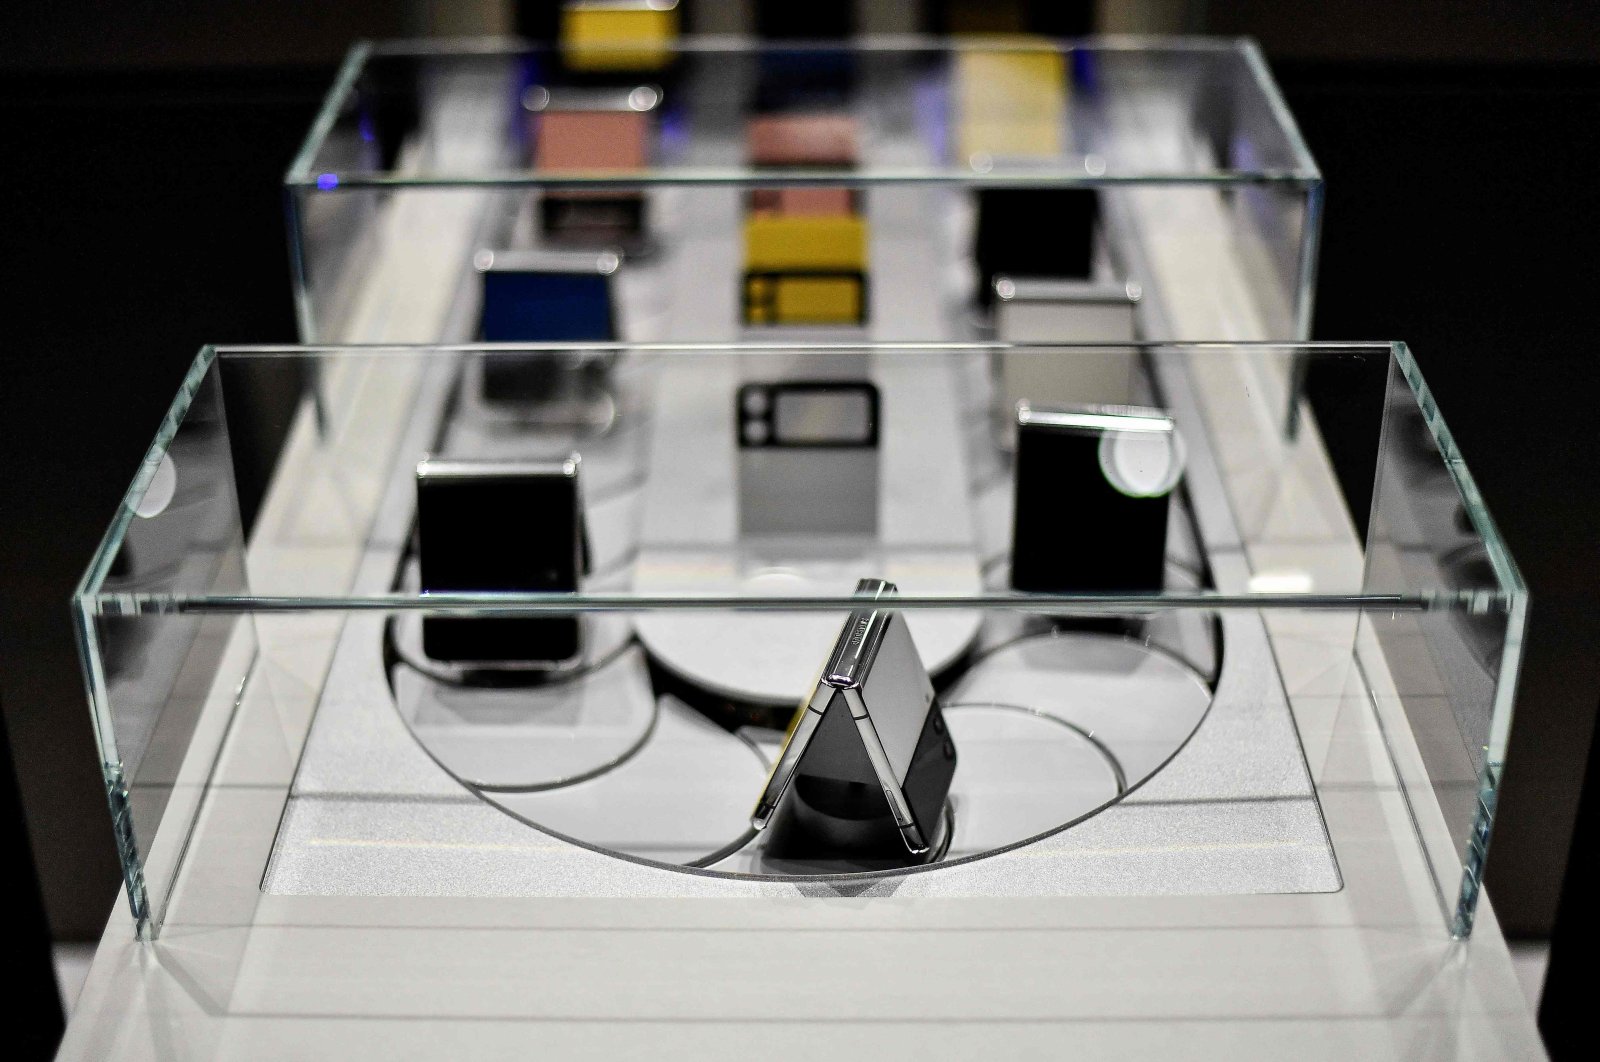 Samsung Galaxy Z Flip 3 smartphones on the opening day of the Mobile World Congress in Barcelona, Spain, Feb. 28, 2022. (AFP Photo)